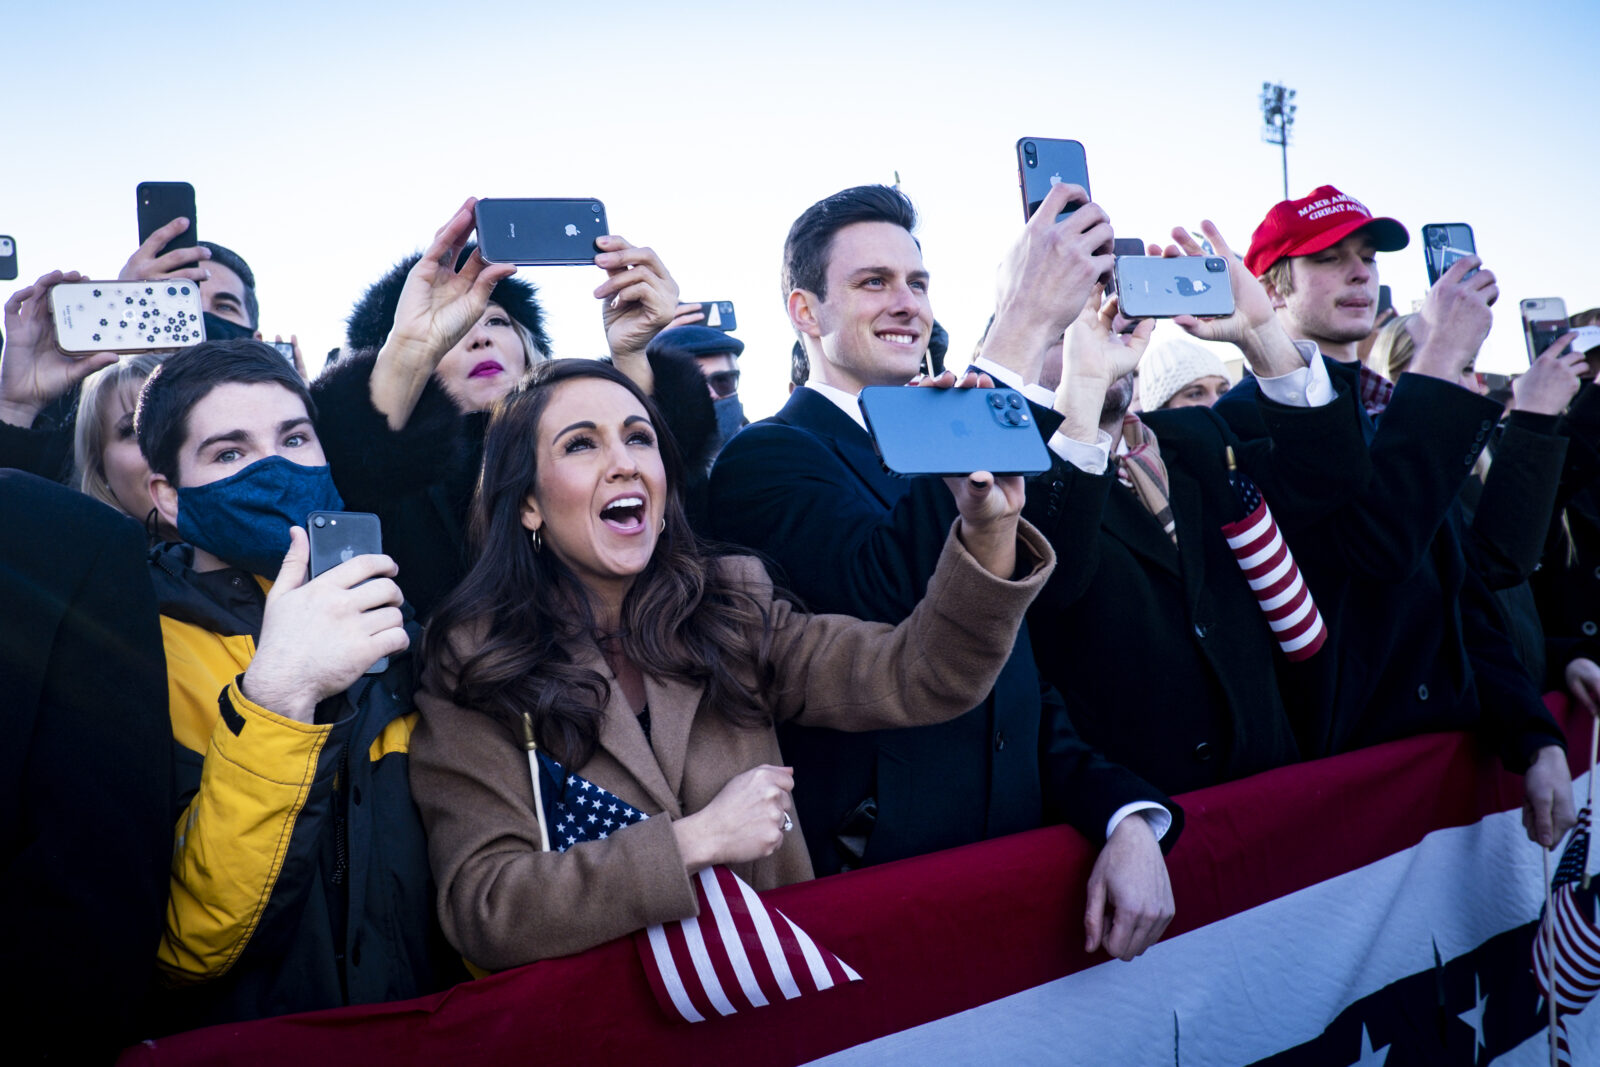 Newly elected Rep. Lauren Boebert (R-CO) listens to President Donald Trump speak to supporters at Joint Base Andrews before boarding Air Force One for his last time as President on January 20, 2021. Trump is traveling to his Mar-a-Lago Club in Palm Beach, Fla.